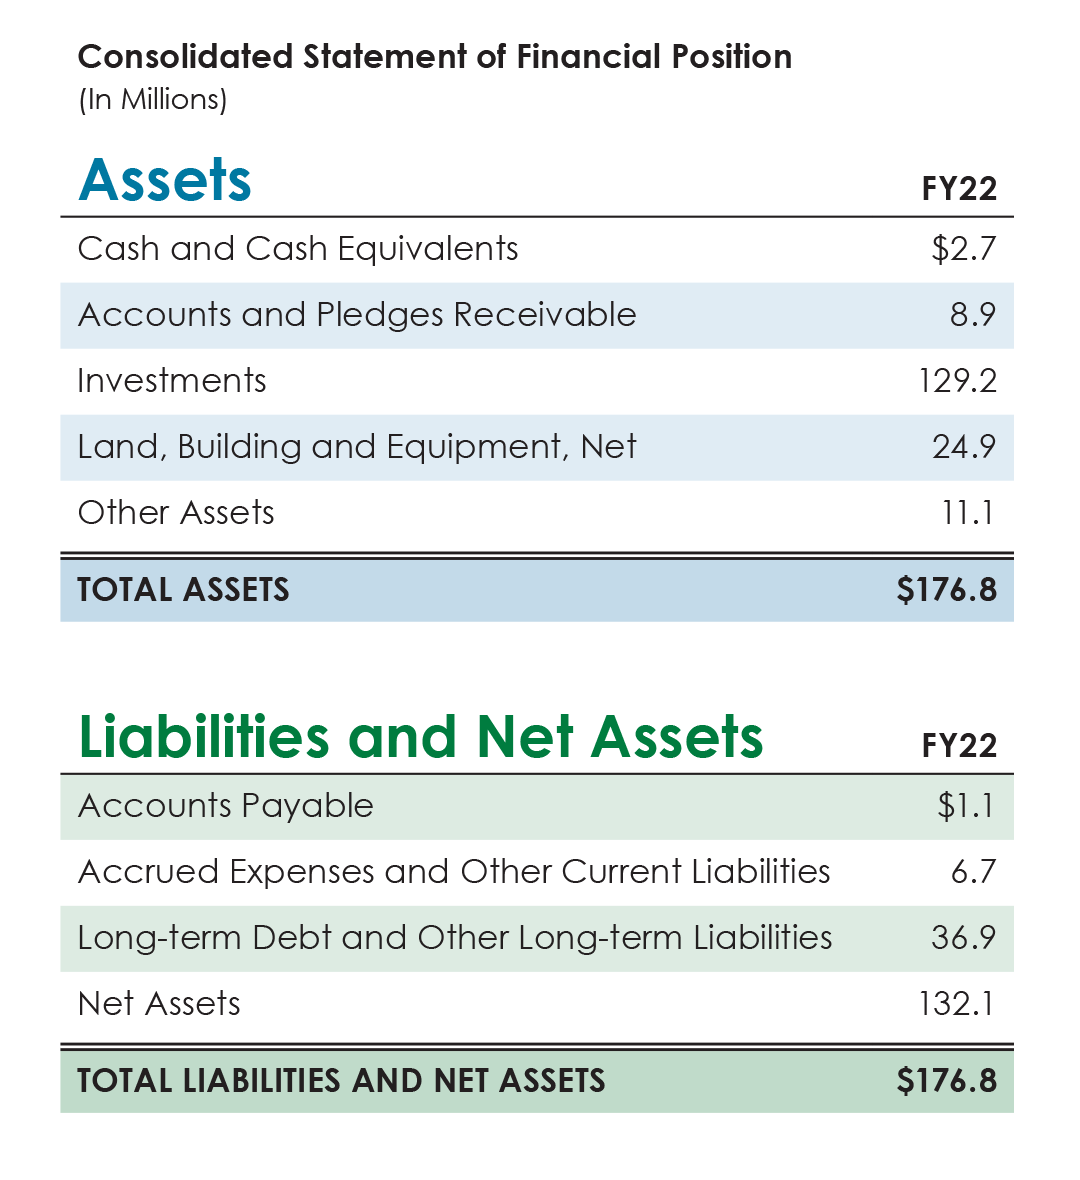 Assets and liabilities for FY22